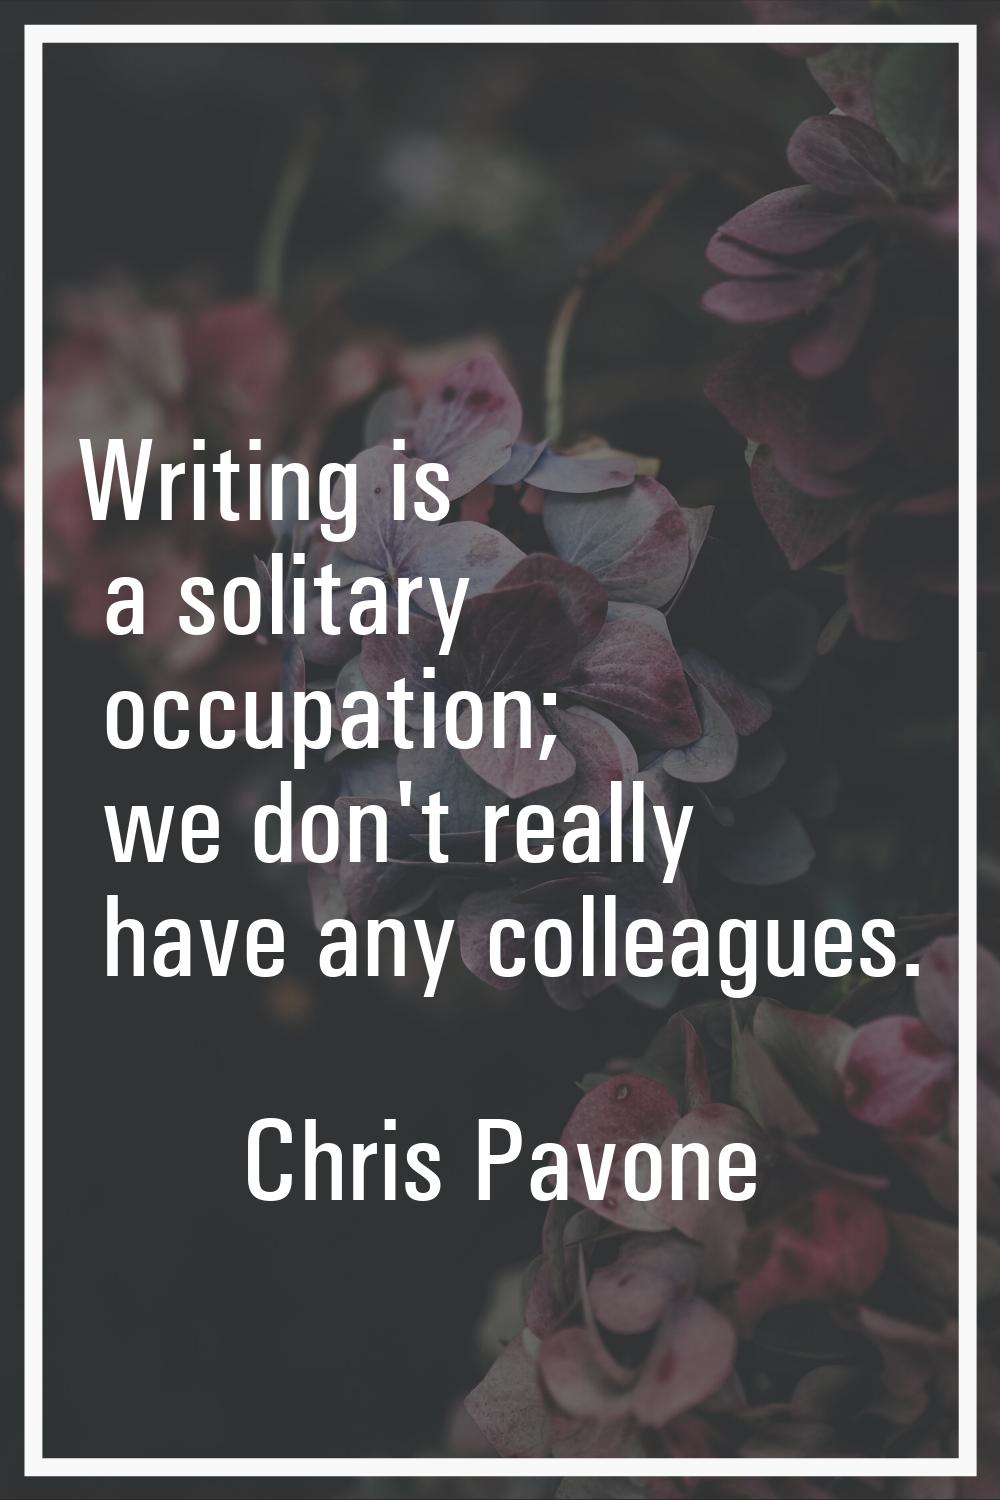 Writing is a solitary occupation; we don't really have any colleagues.